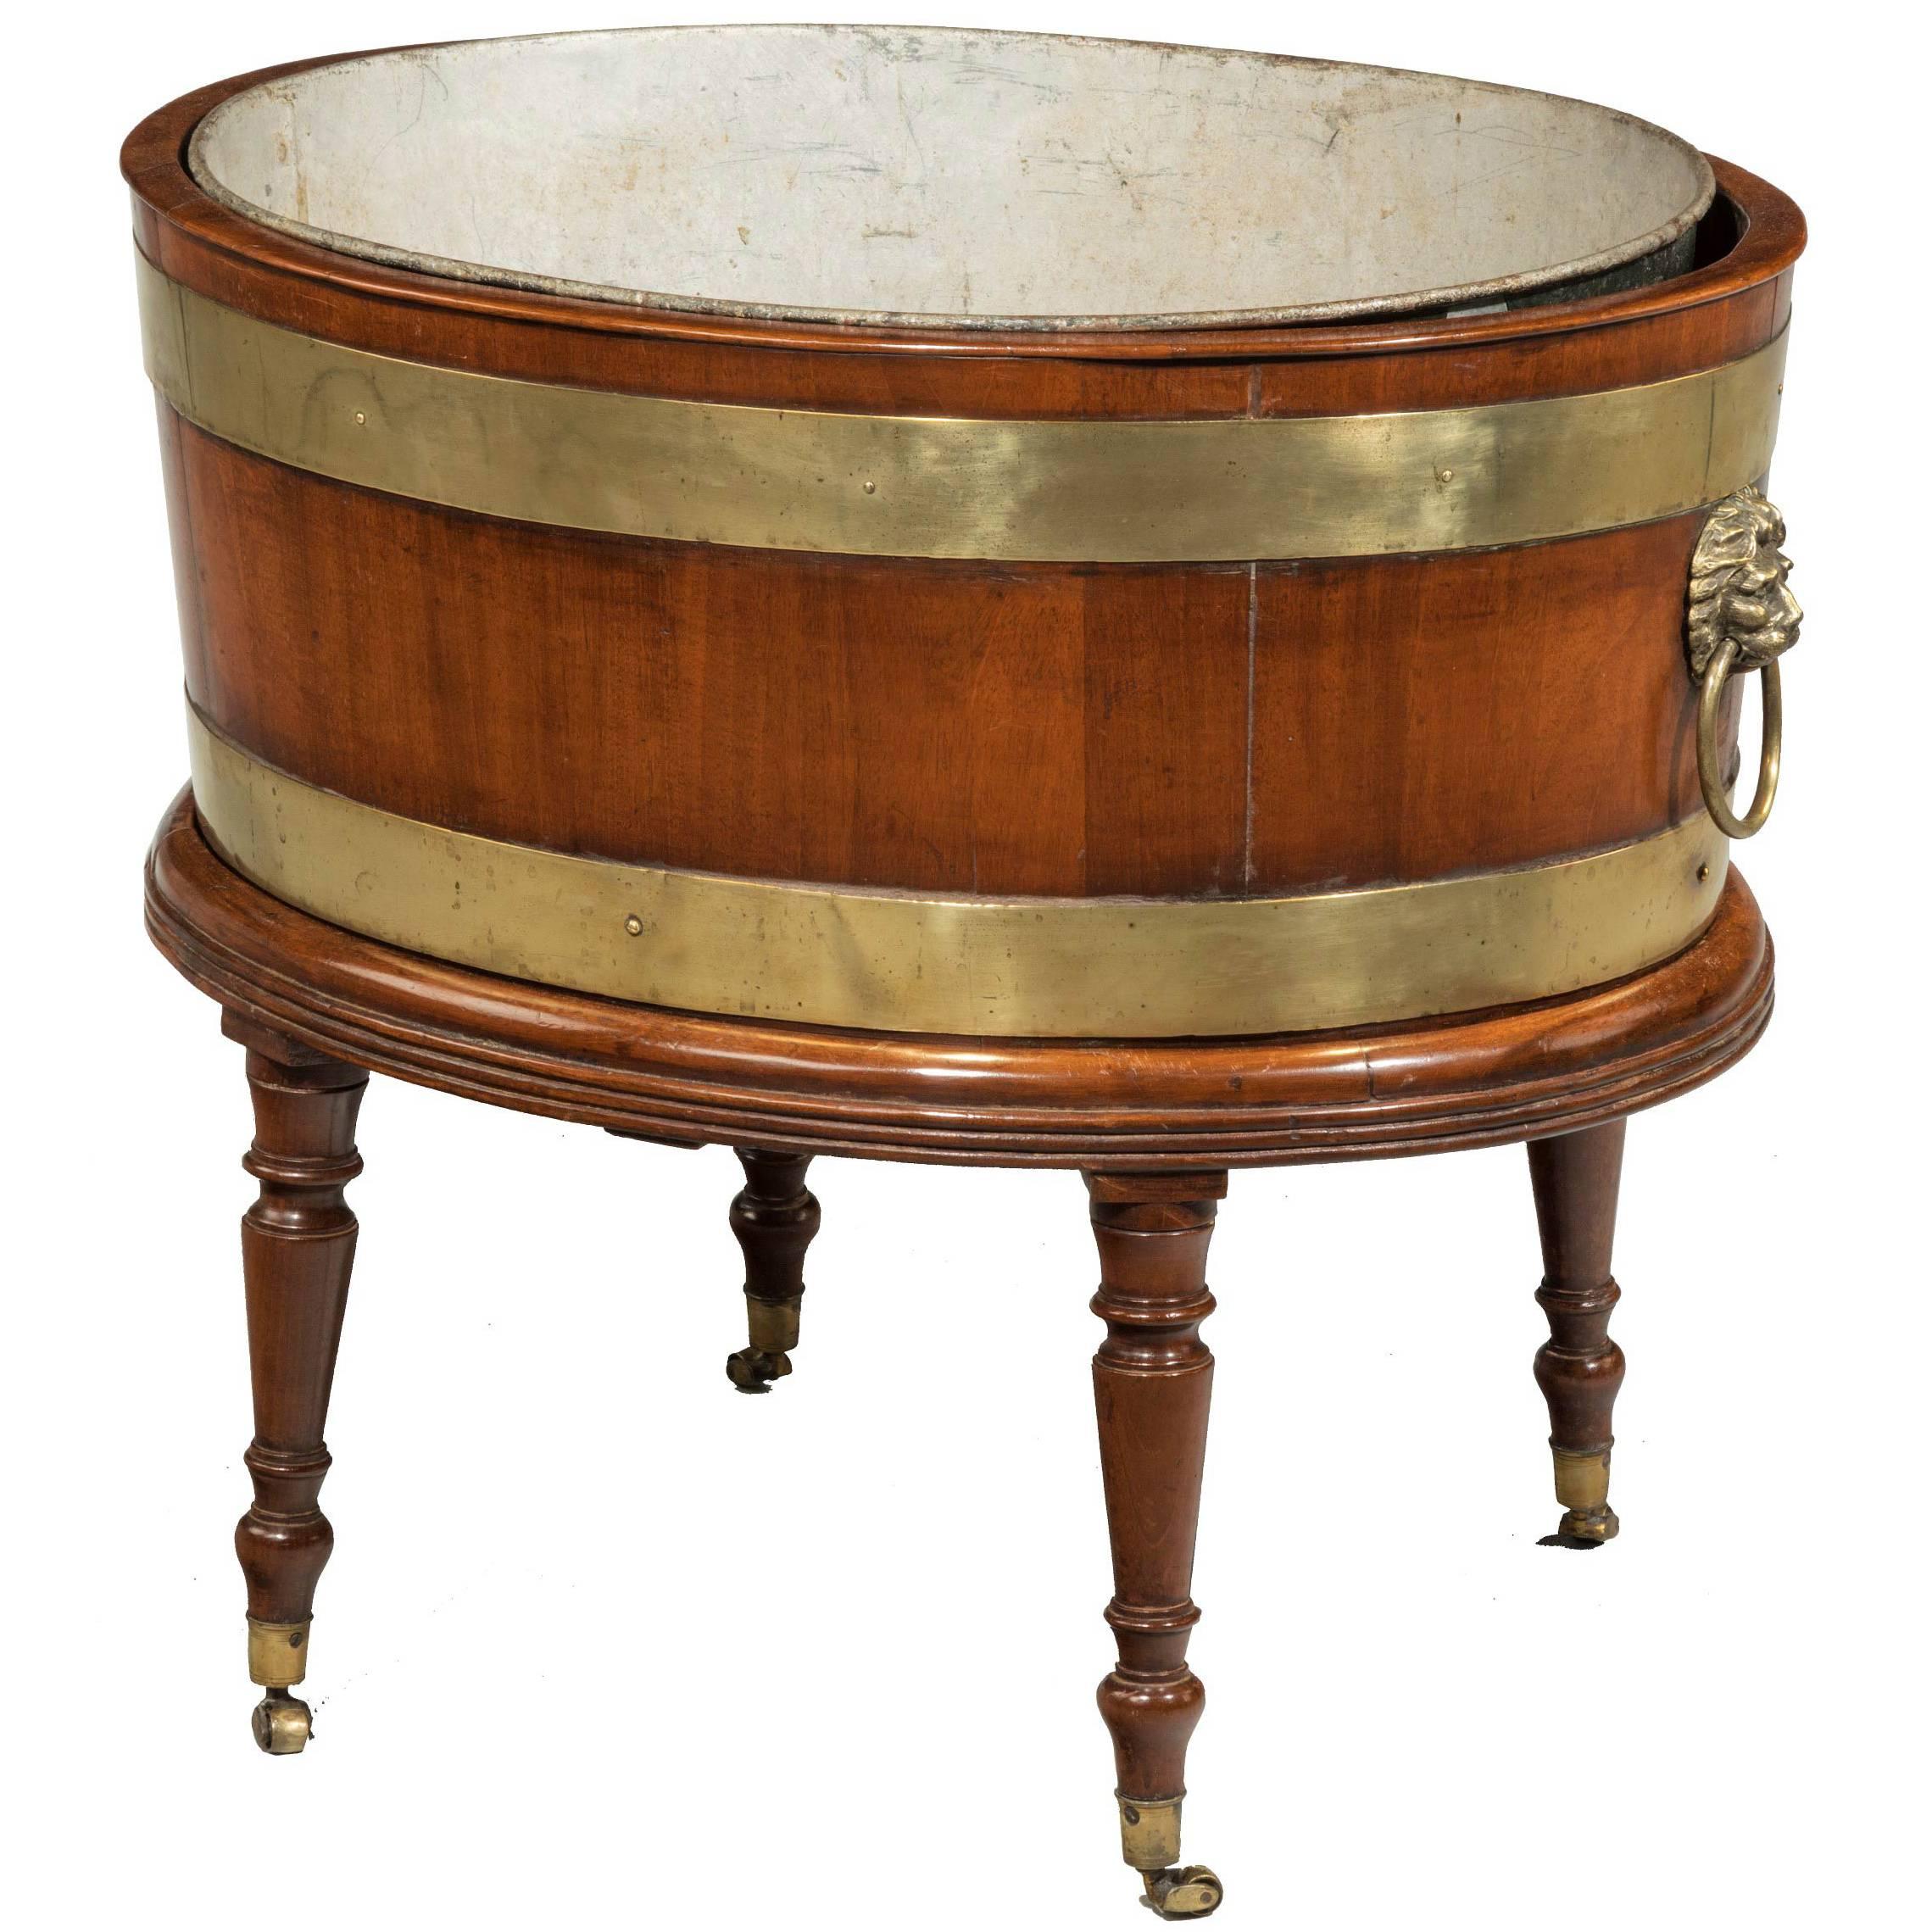 George III Period Oval Wine Cooler with Broad Brass Bounds